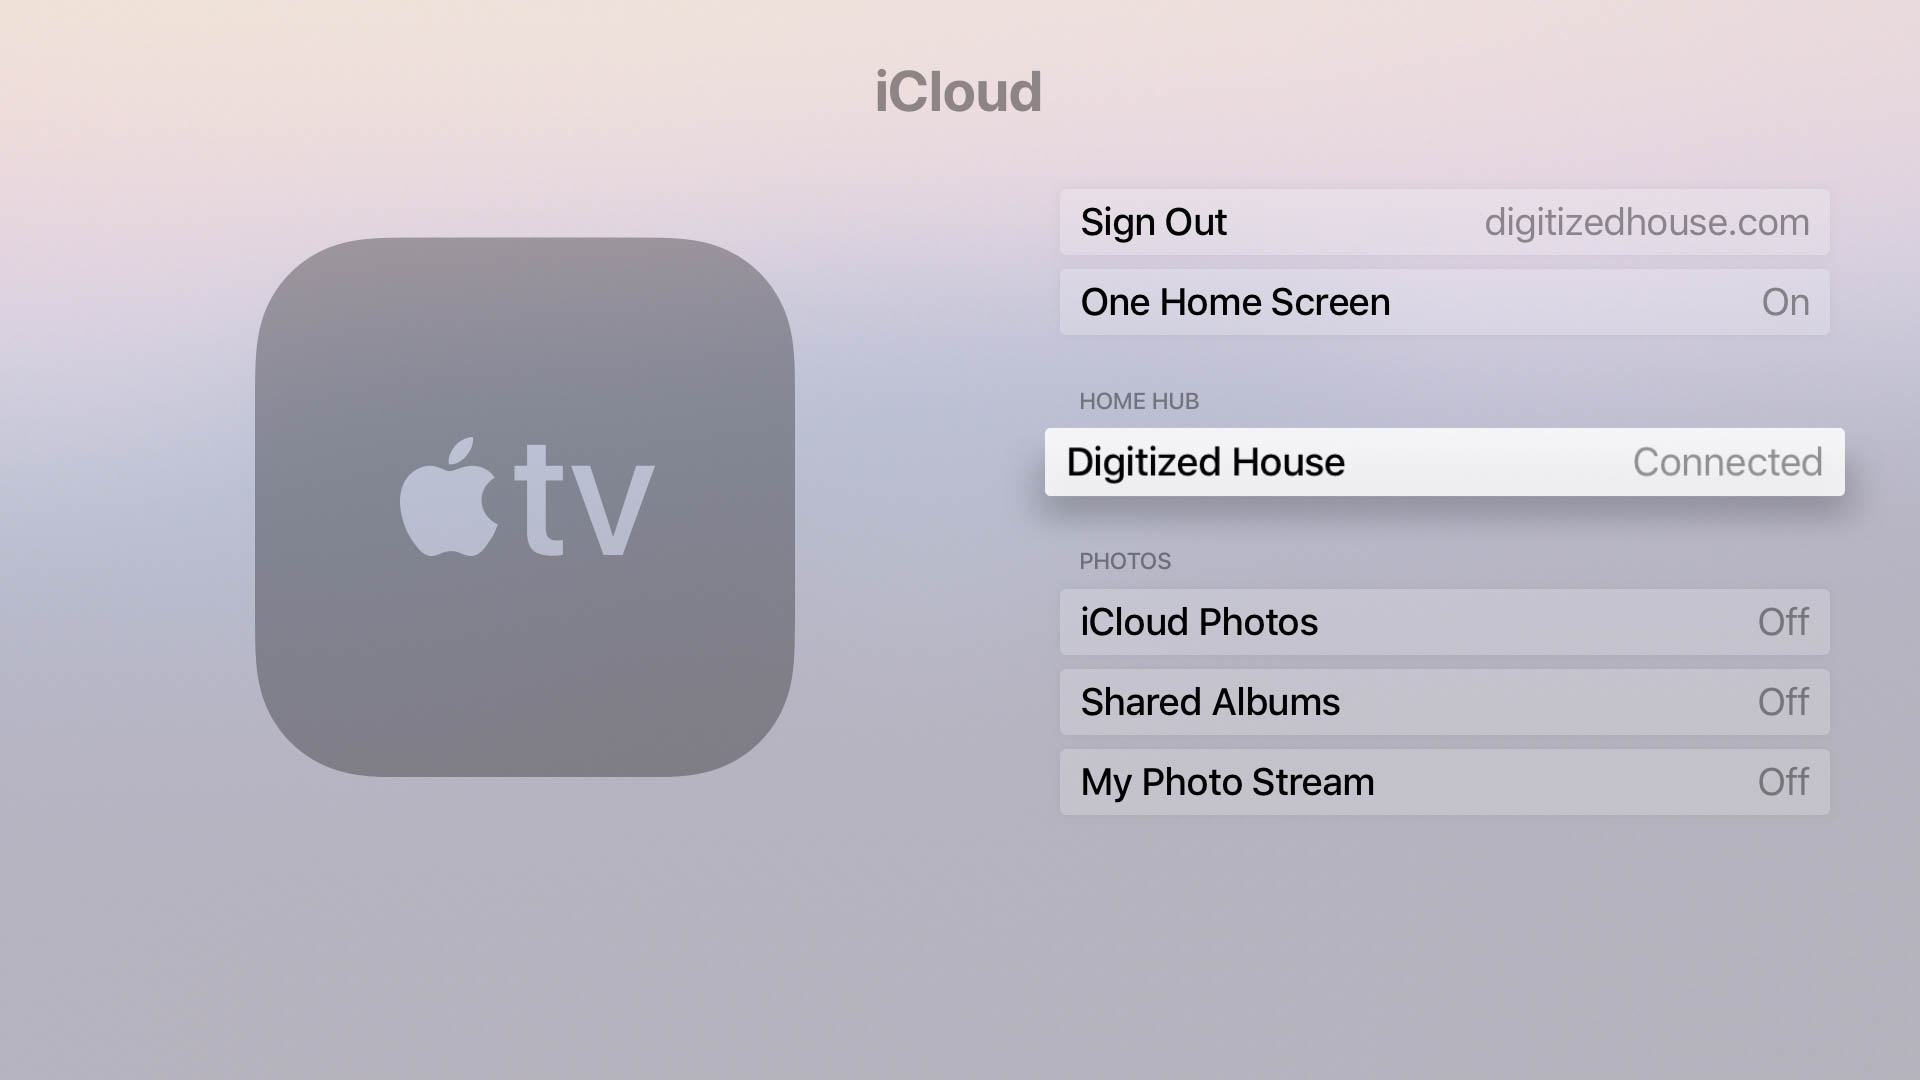 Apple TV boxes from the 3rd generation onward can be set up as HomeKit Home Hubs. Image: Digitized House.